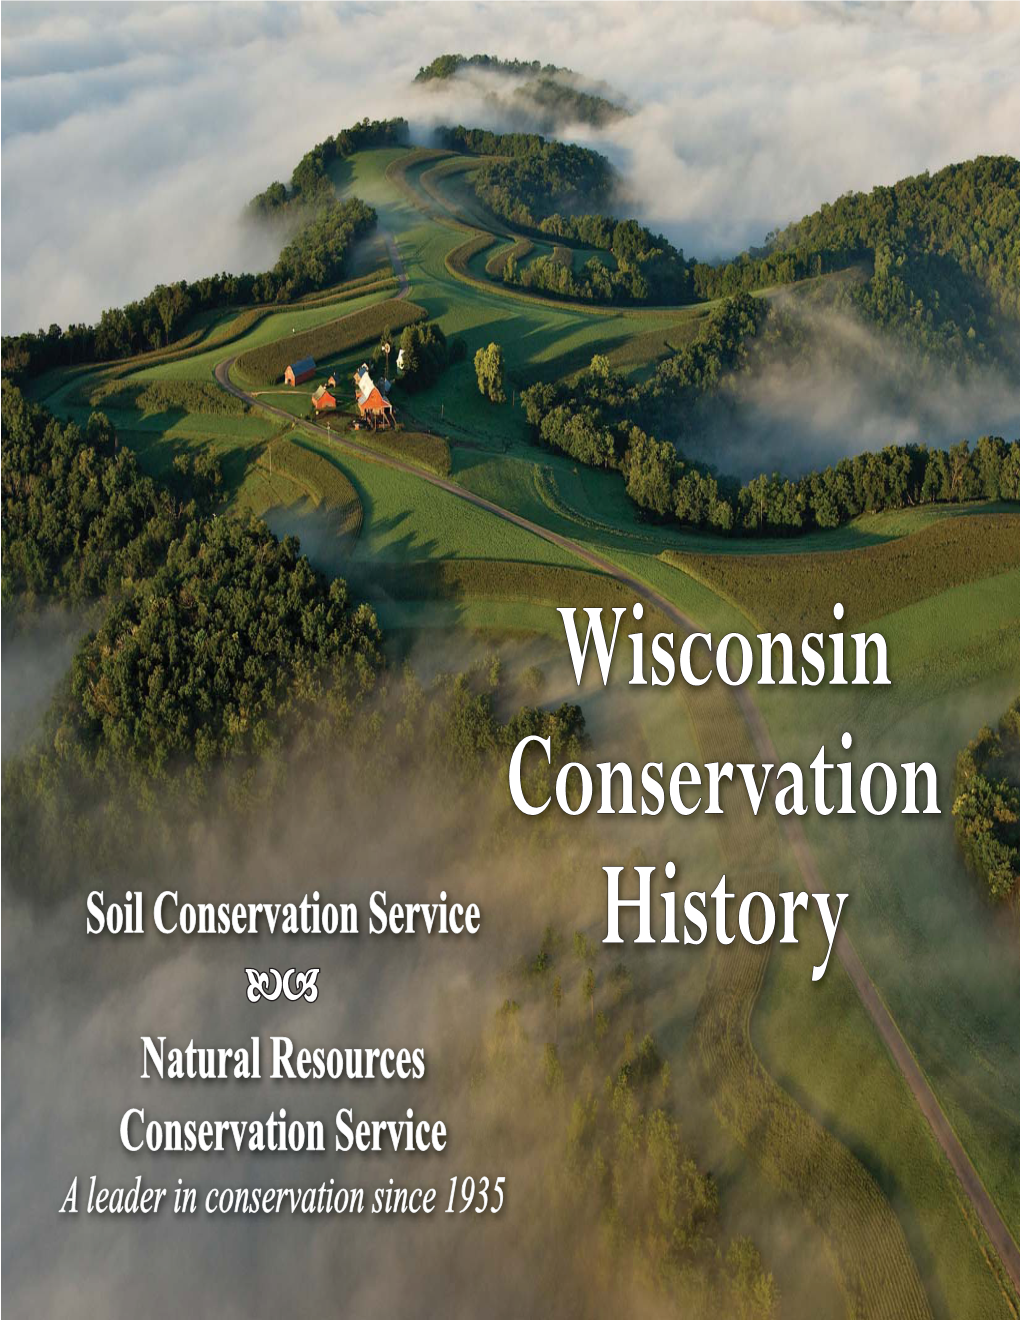 Wisconsin Conservation History